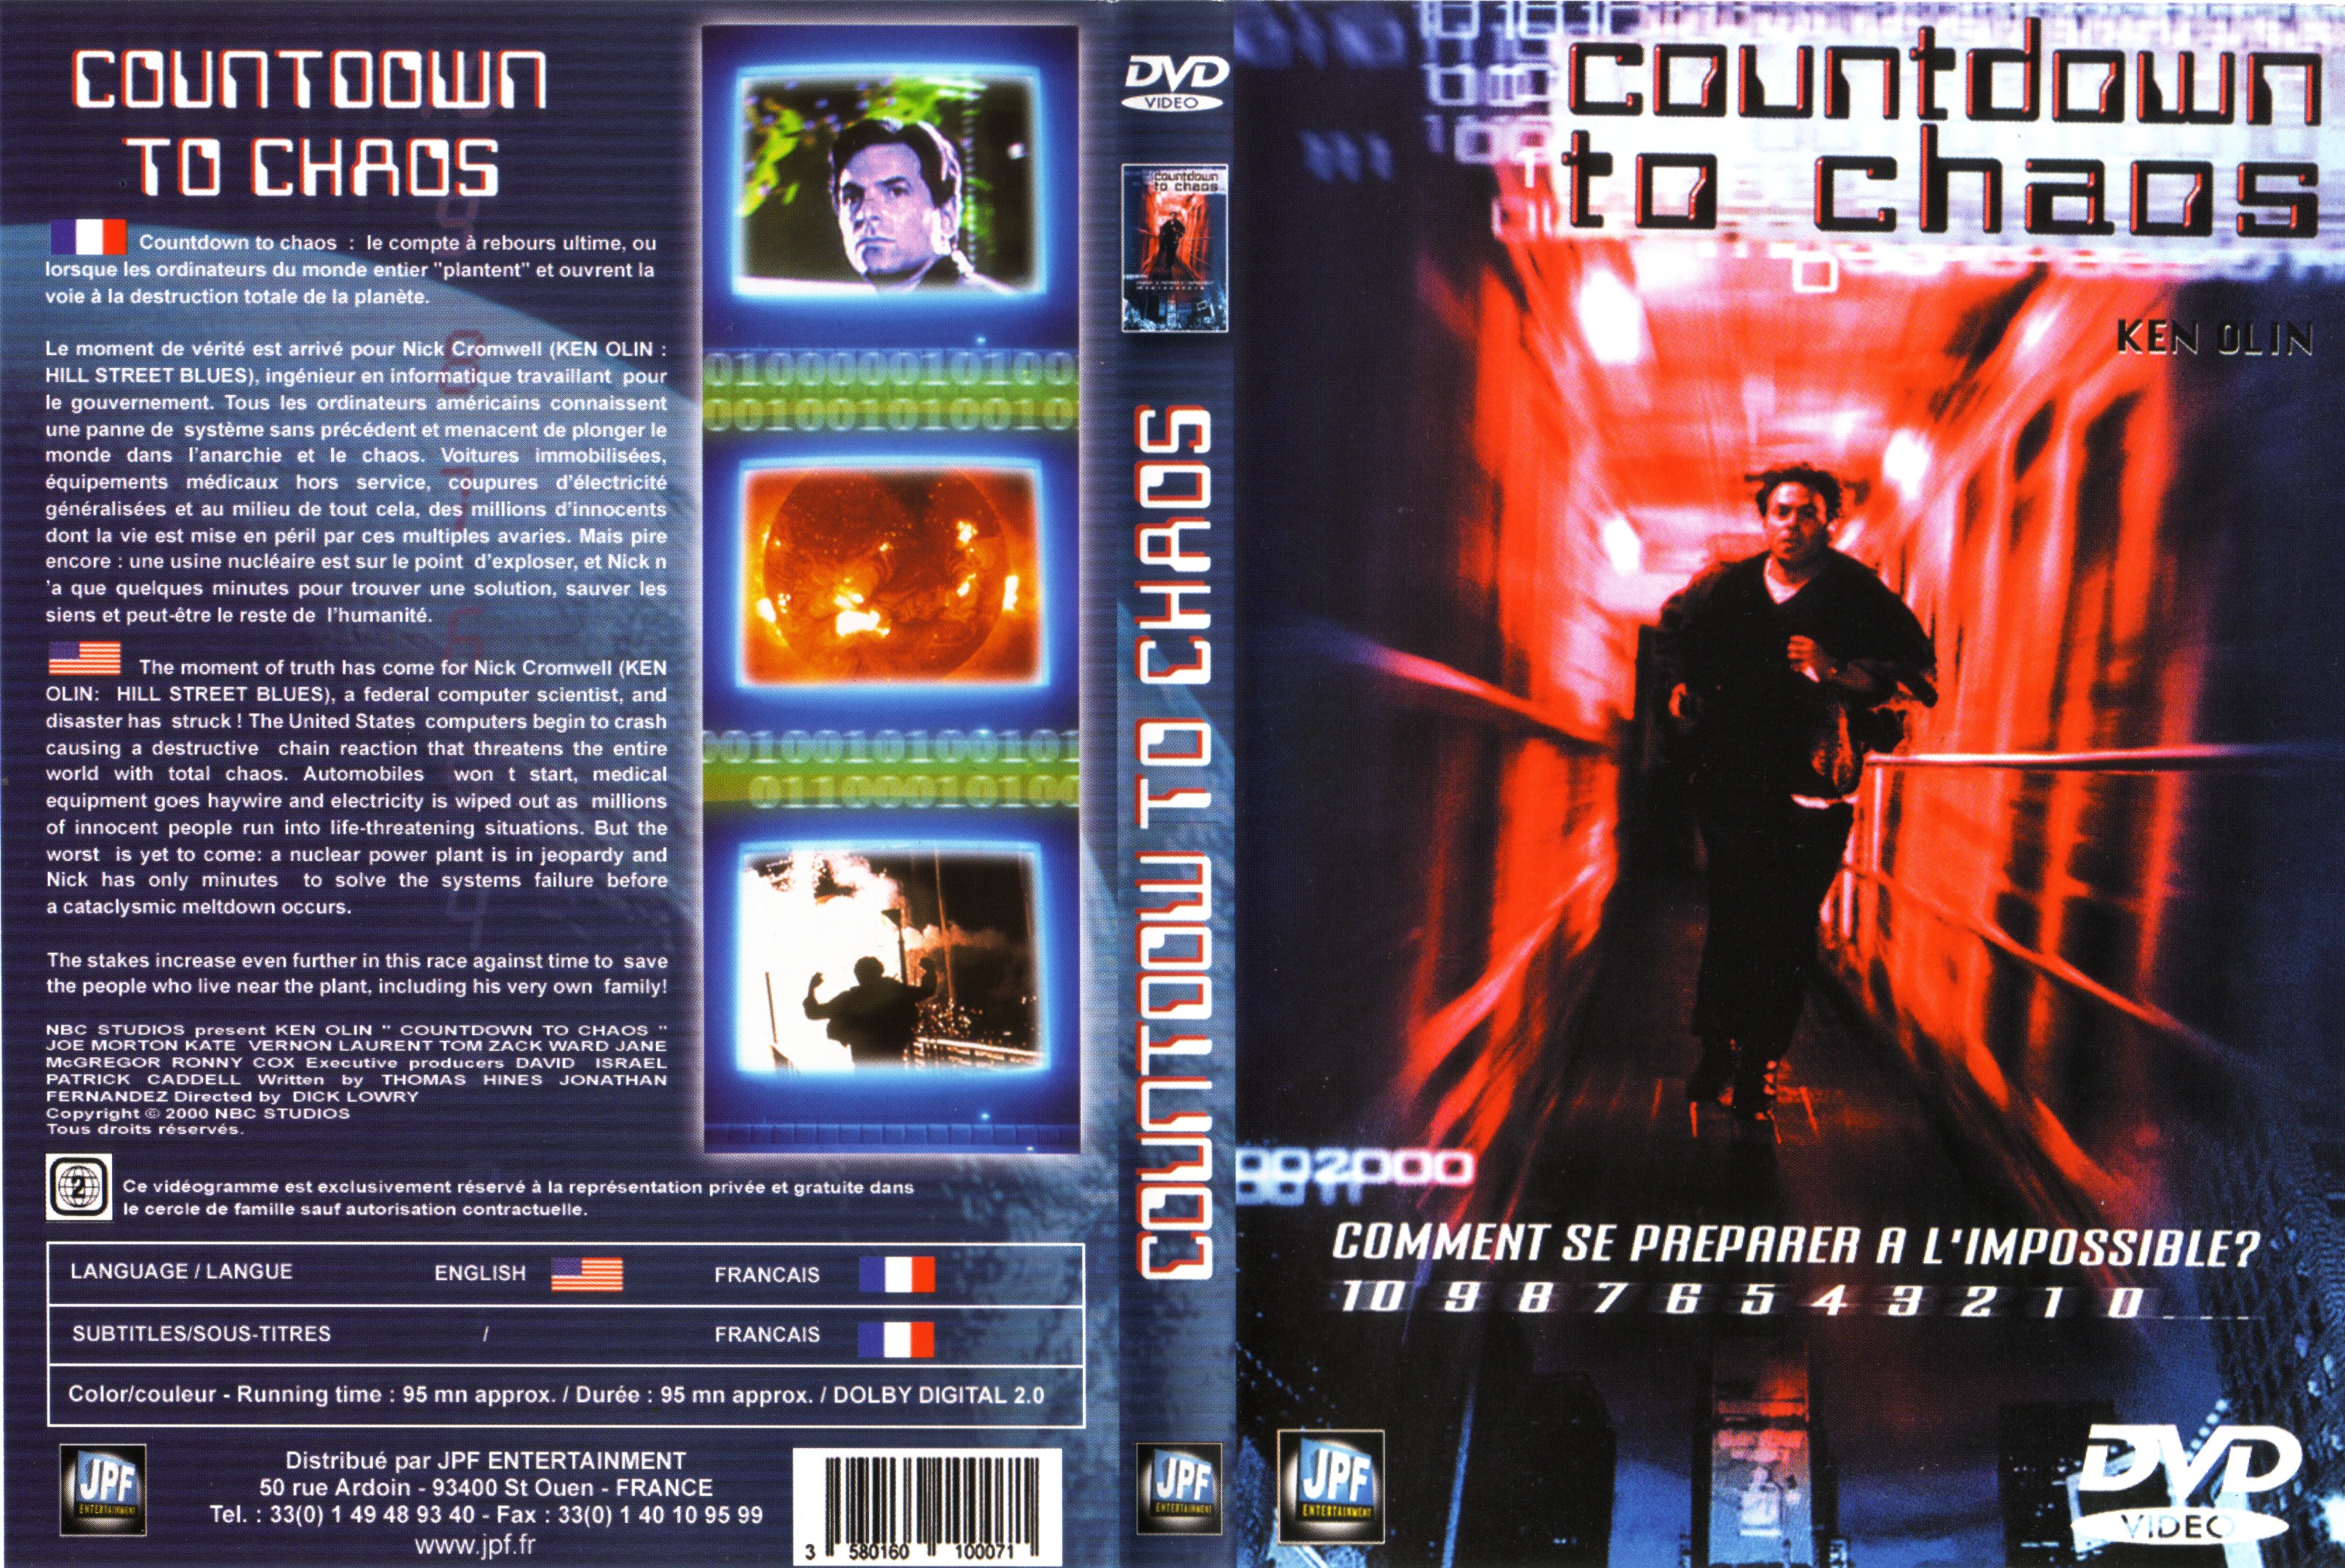 Jaquette DVD Countdown to chaos